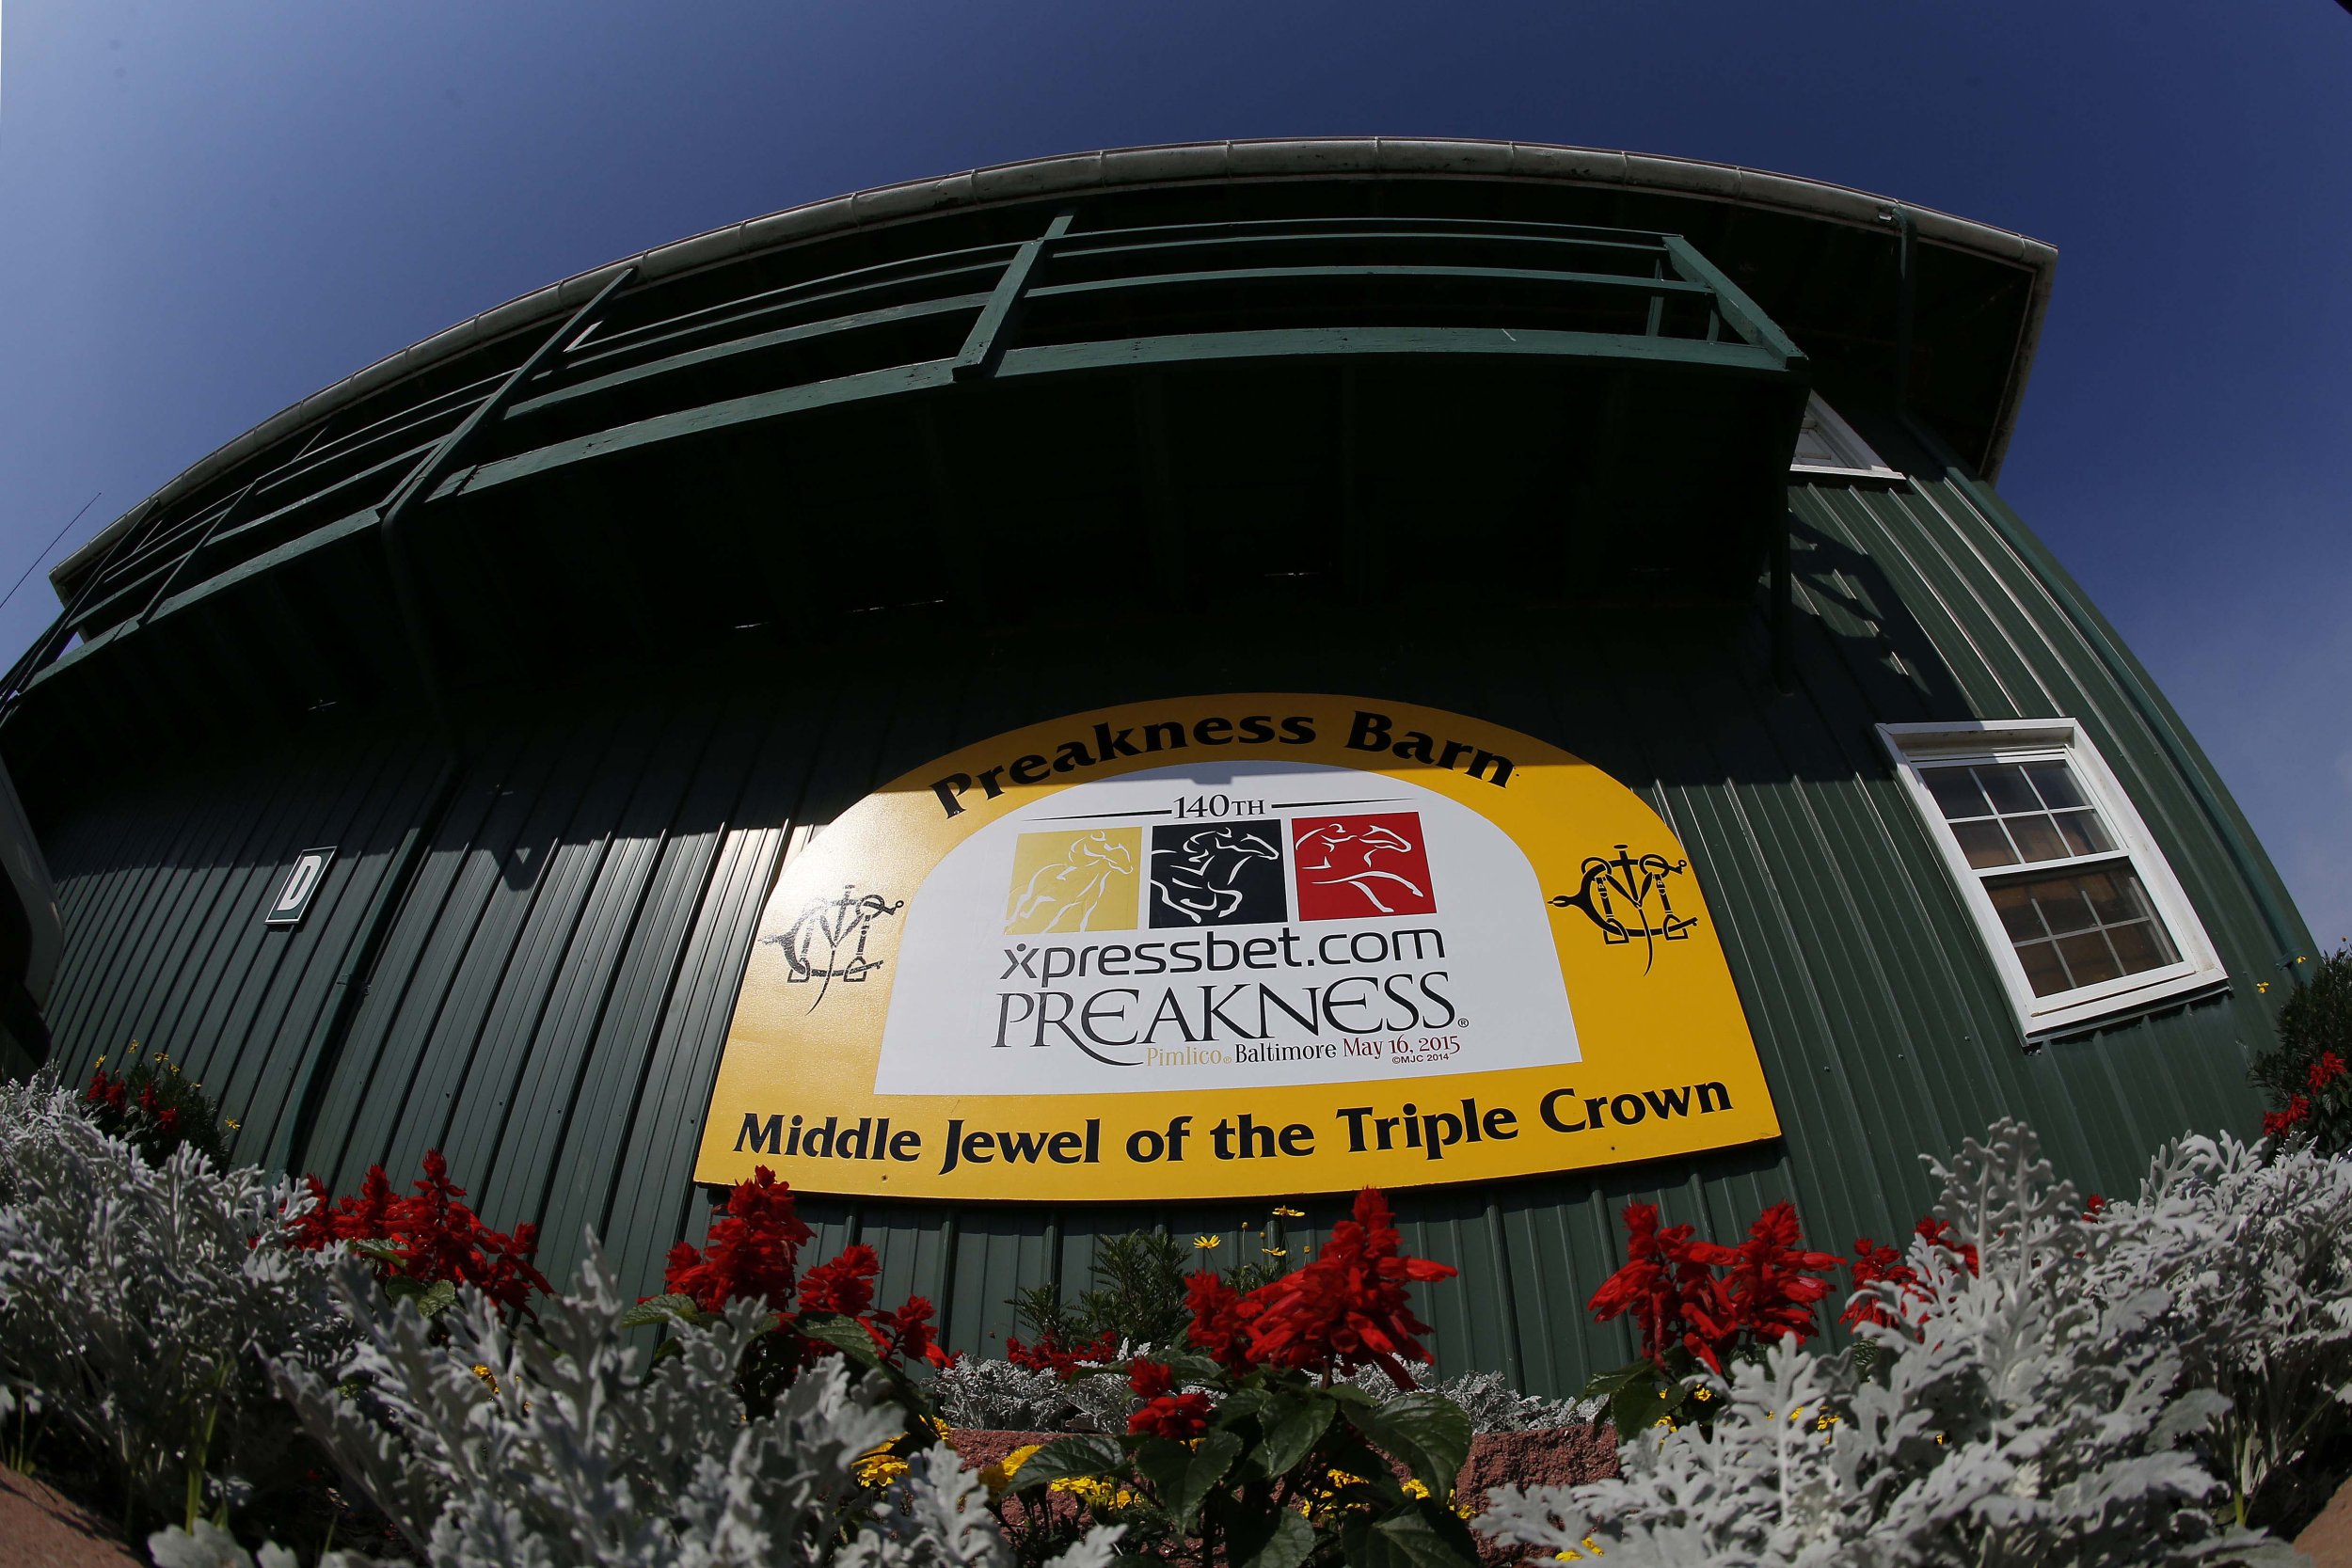 Preakness 2015 Start Time, TV Channel, Live Stream Info, Latest